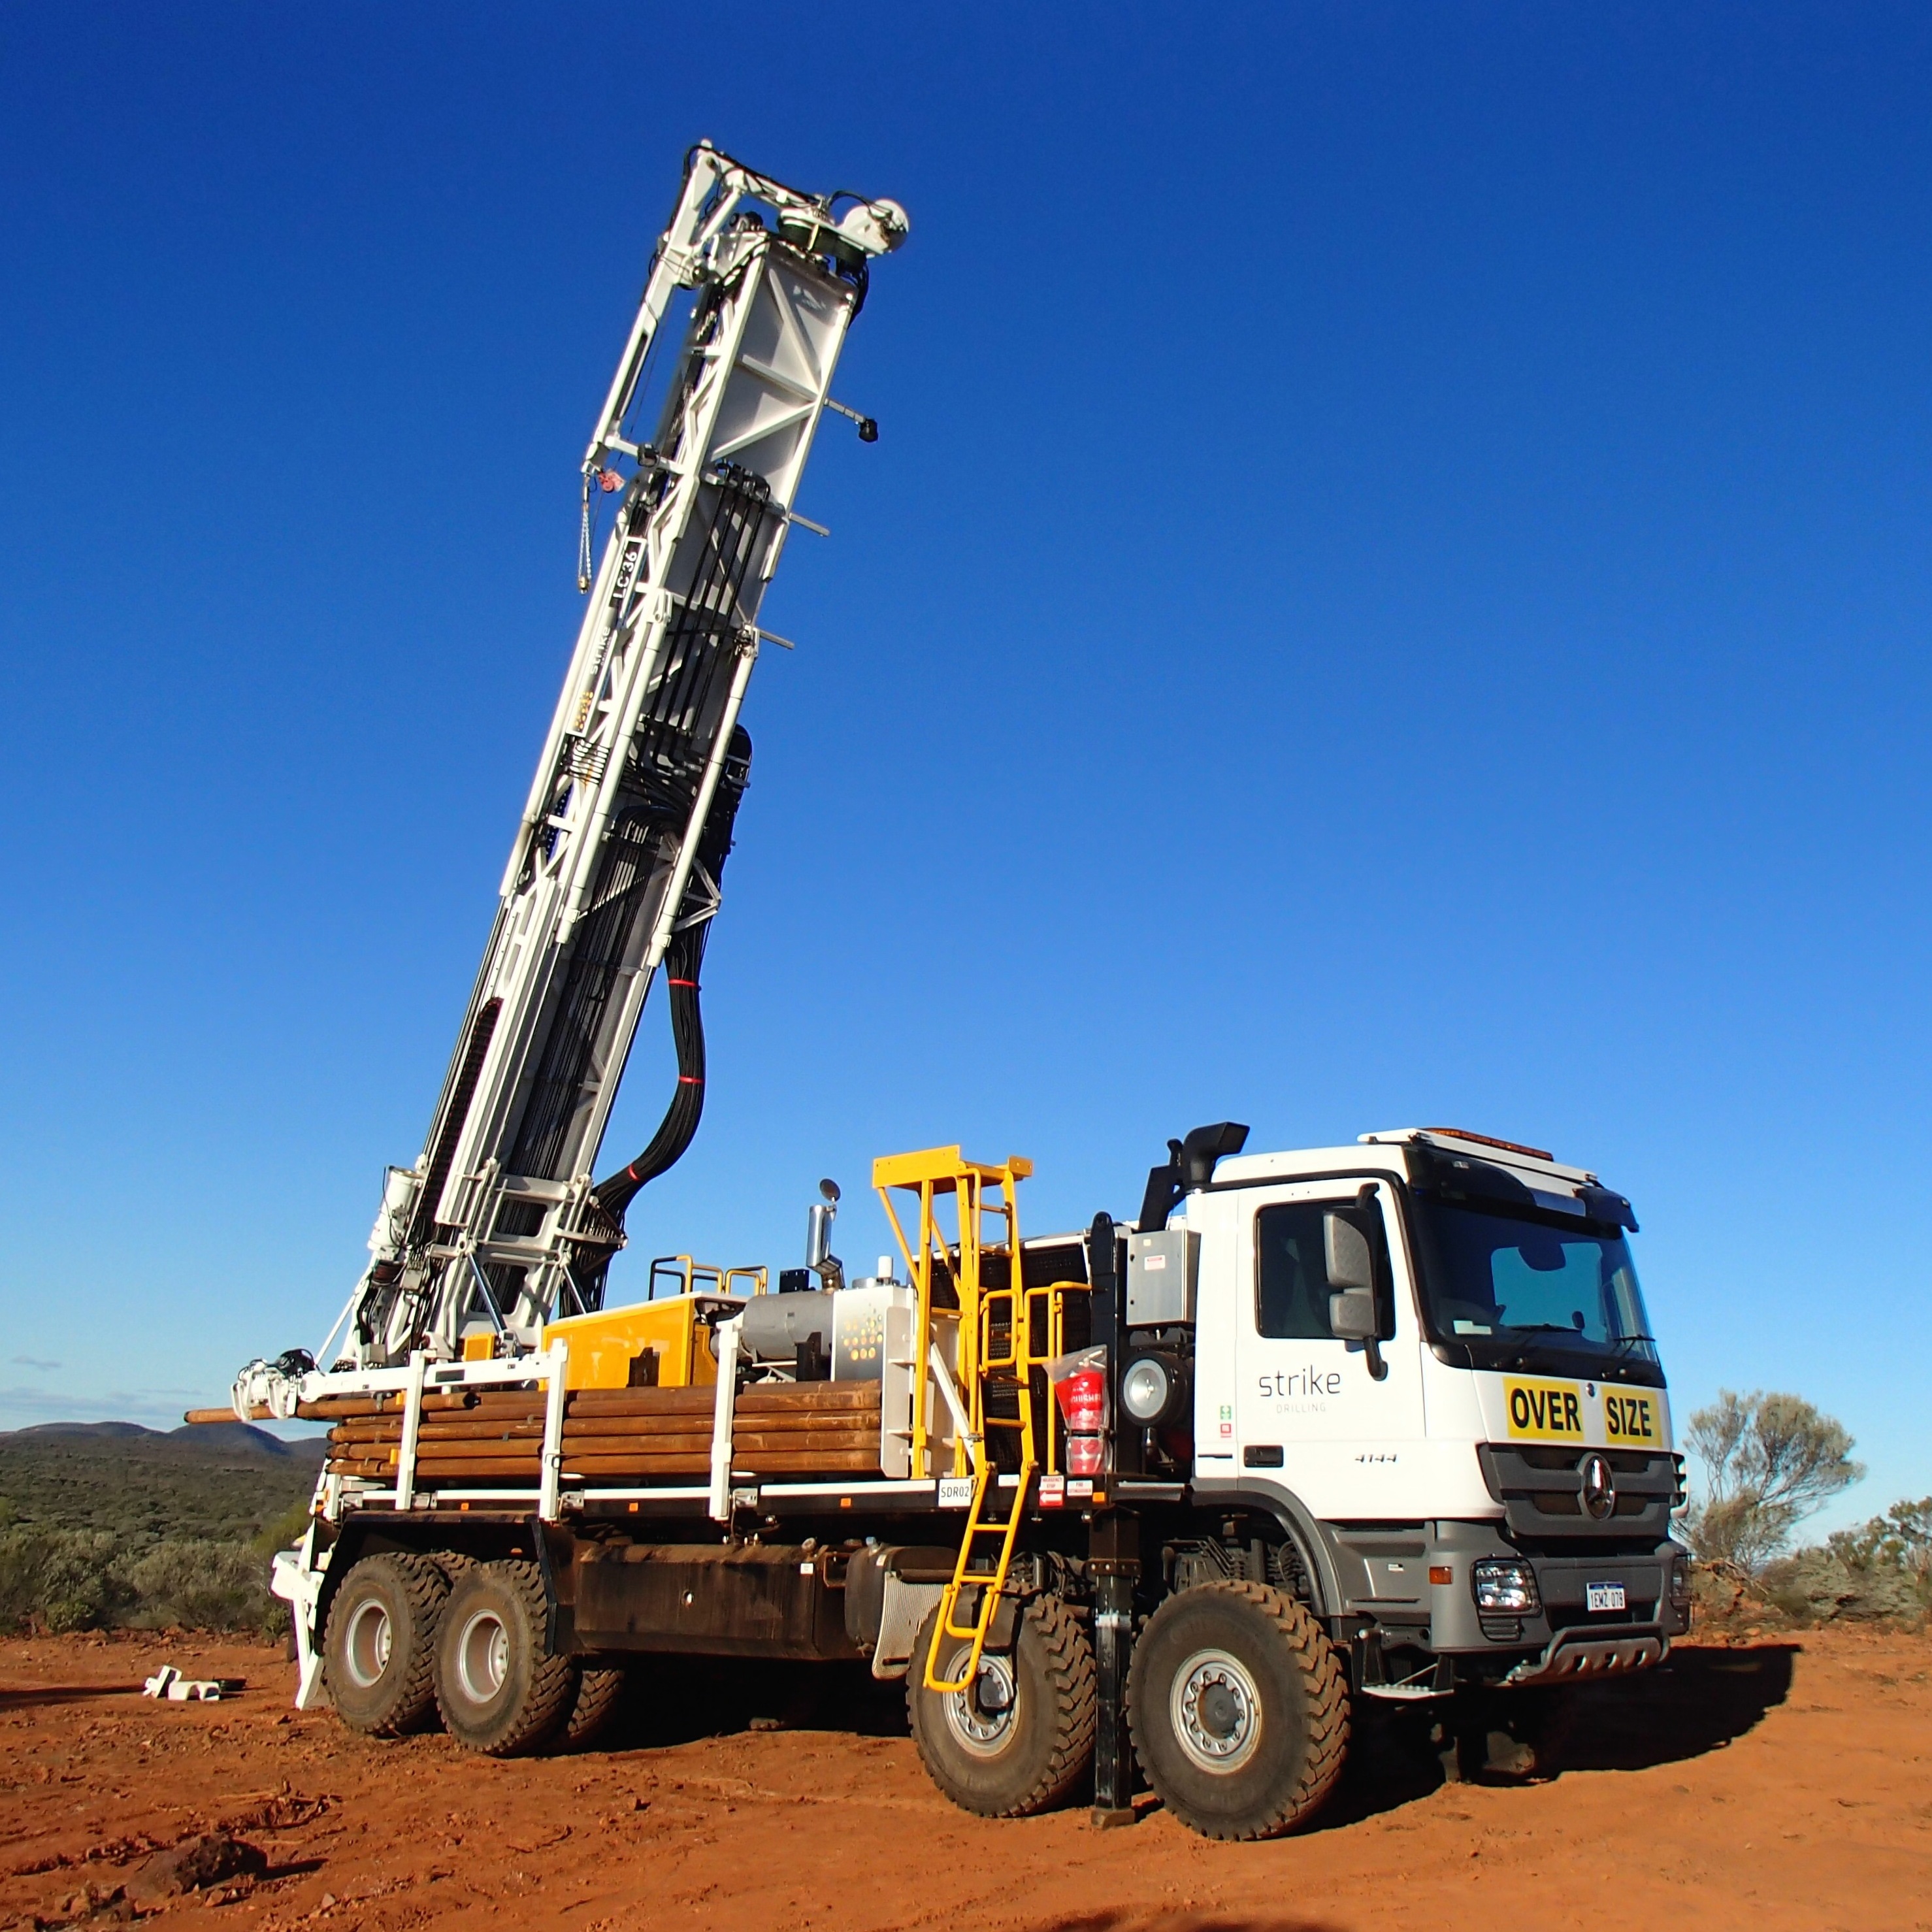 Strike Drilling sends second new KWL 700 Drilling Rig to Sirius Resources